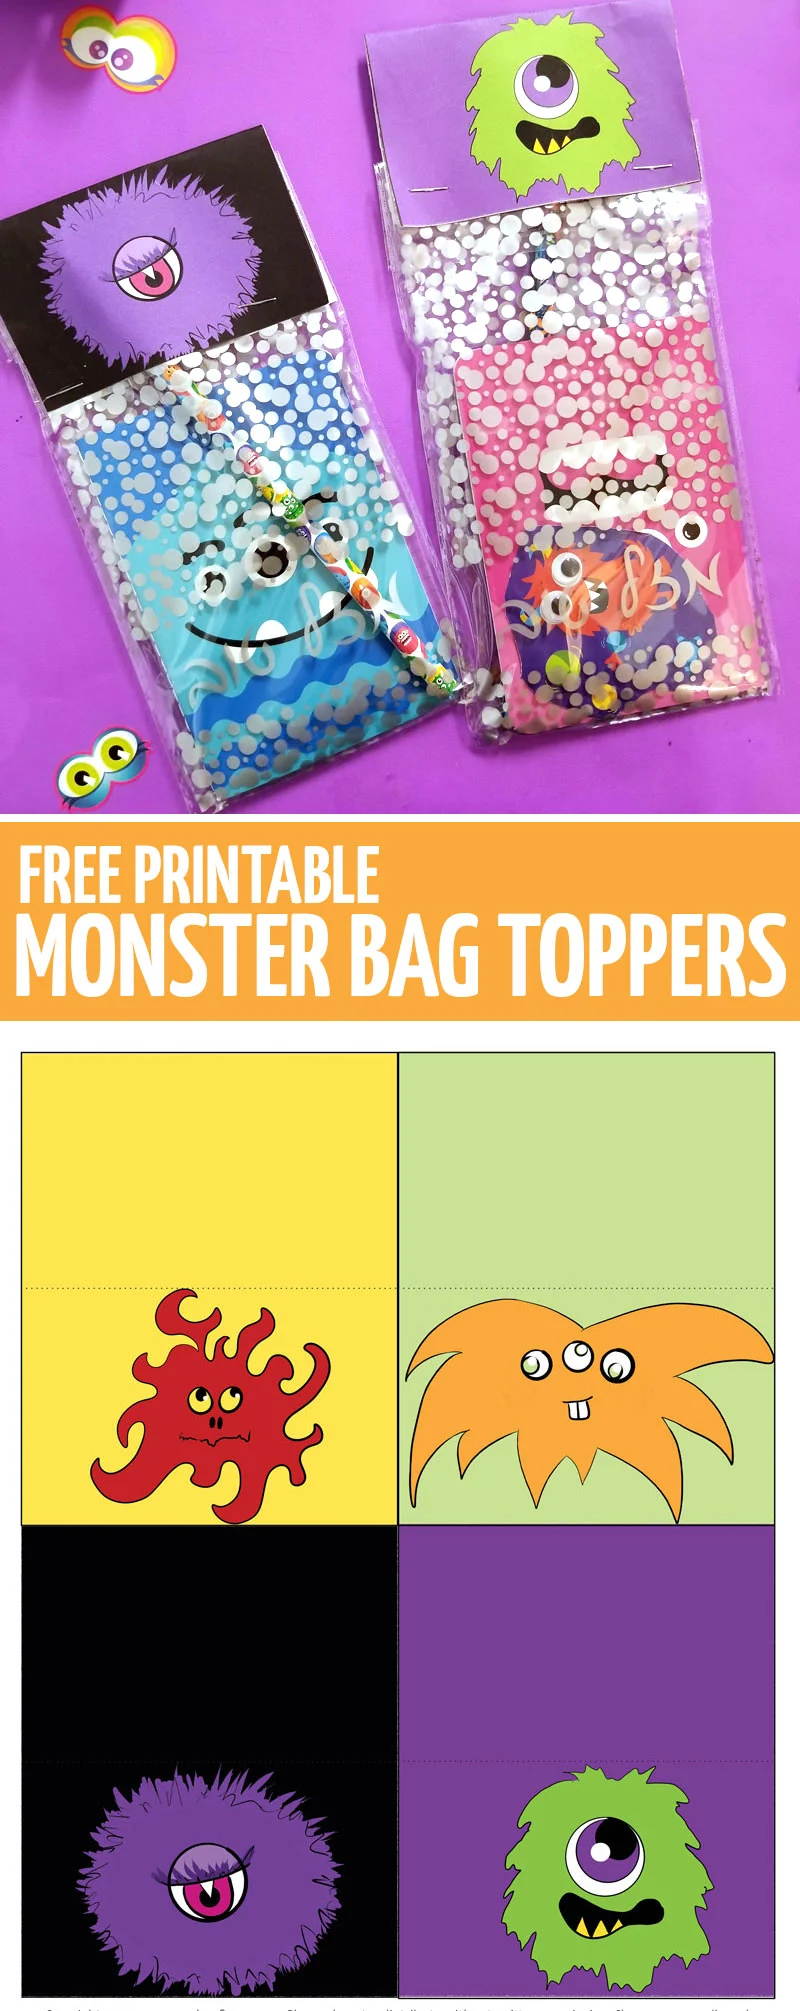 Throwing a monster theme birthday party? Make some monster party favors using these free printable bag toppers!